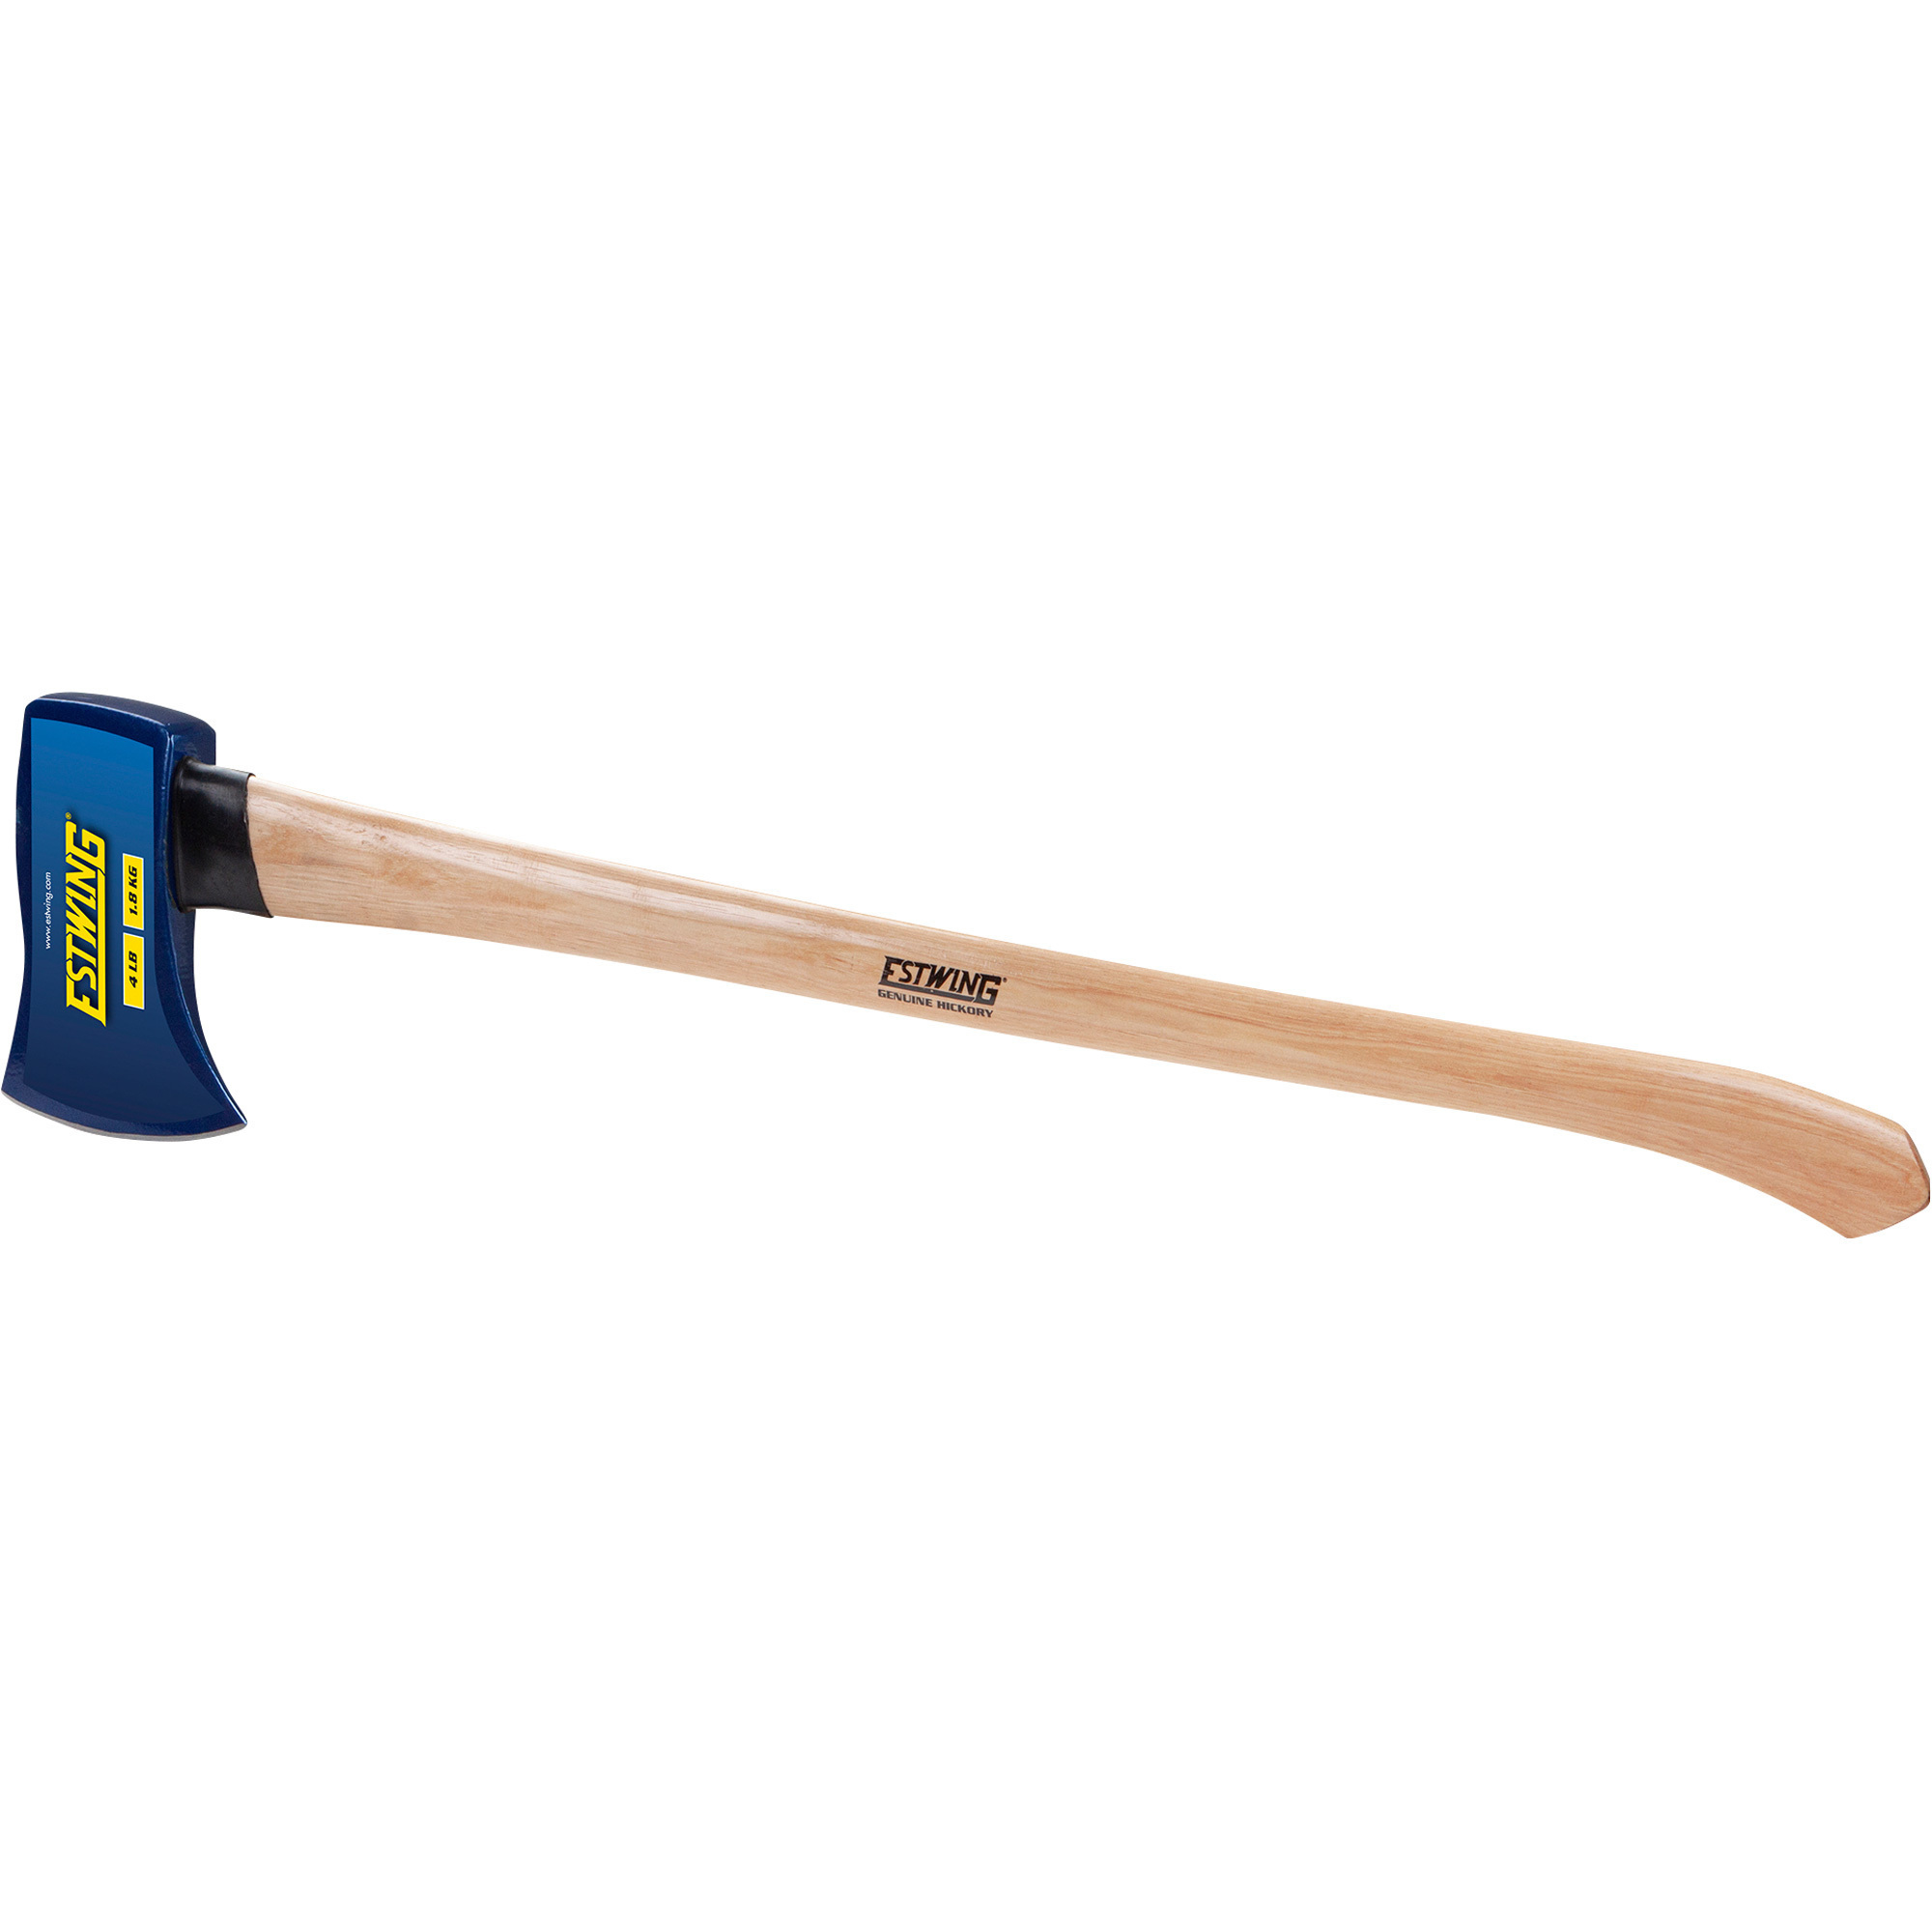 Estwing Single Bit Axe with Hickory Wood Handle, 4-Lb., 36Inch, Model EAX-436W